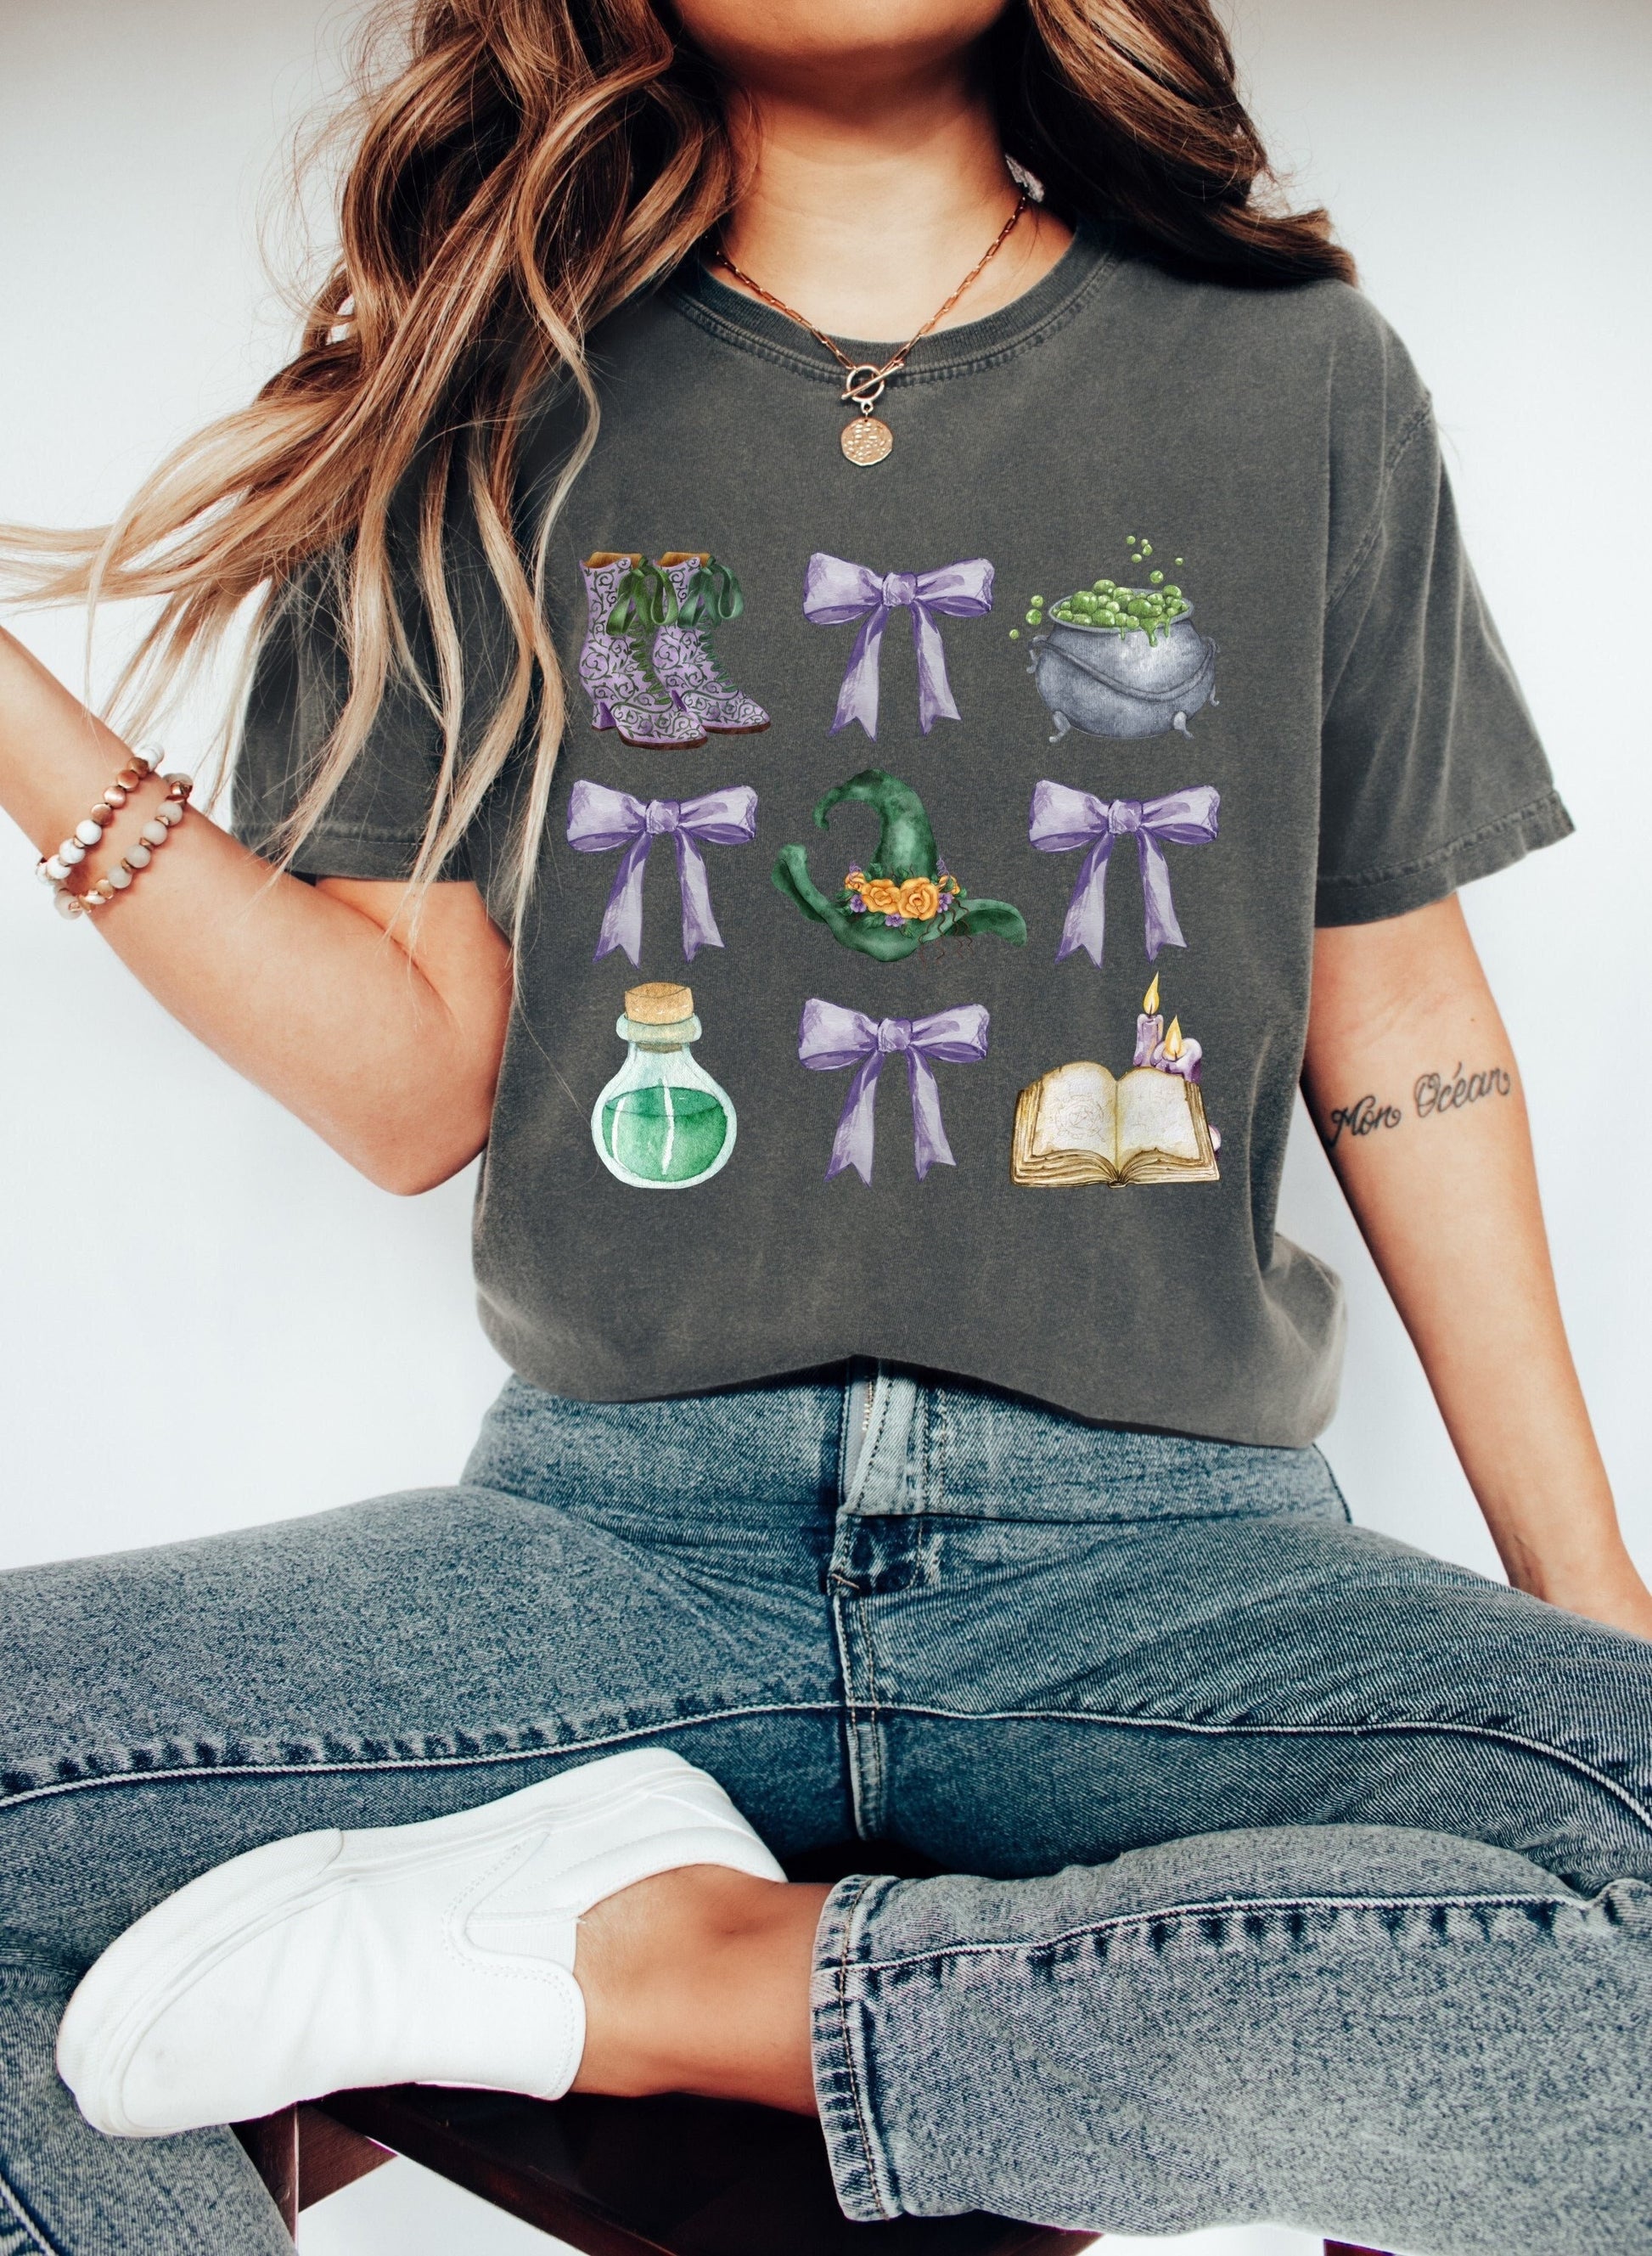 Witch Bow Collage Halloween Shirt, Coquette Bow Halloween Shirt, Halloween Shirts, Spooky Season Shirt, Coquette Top